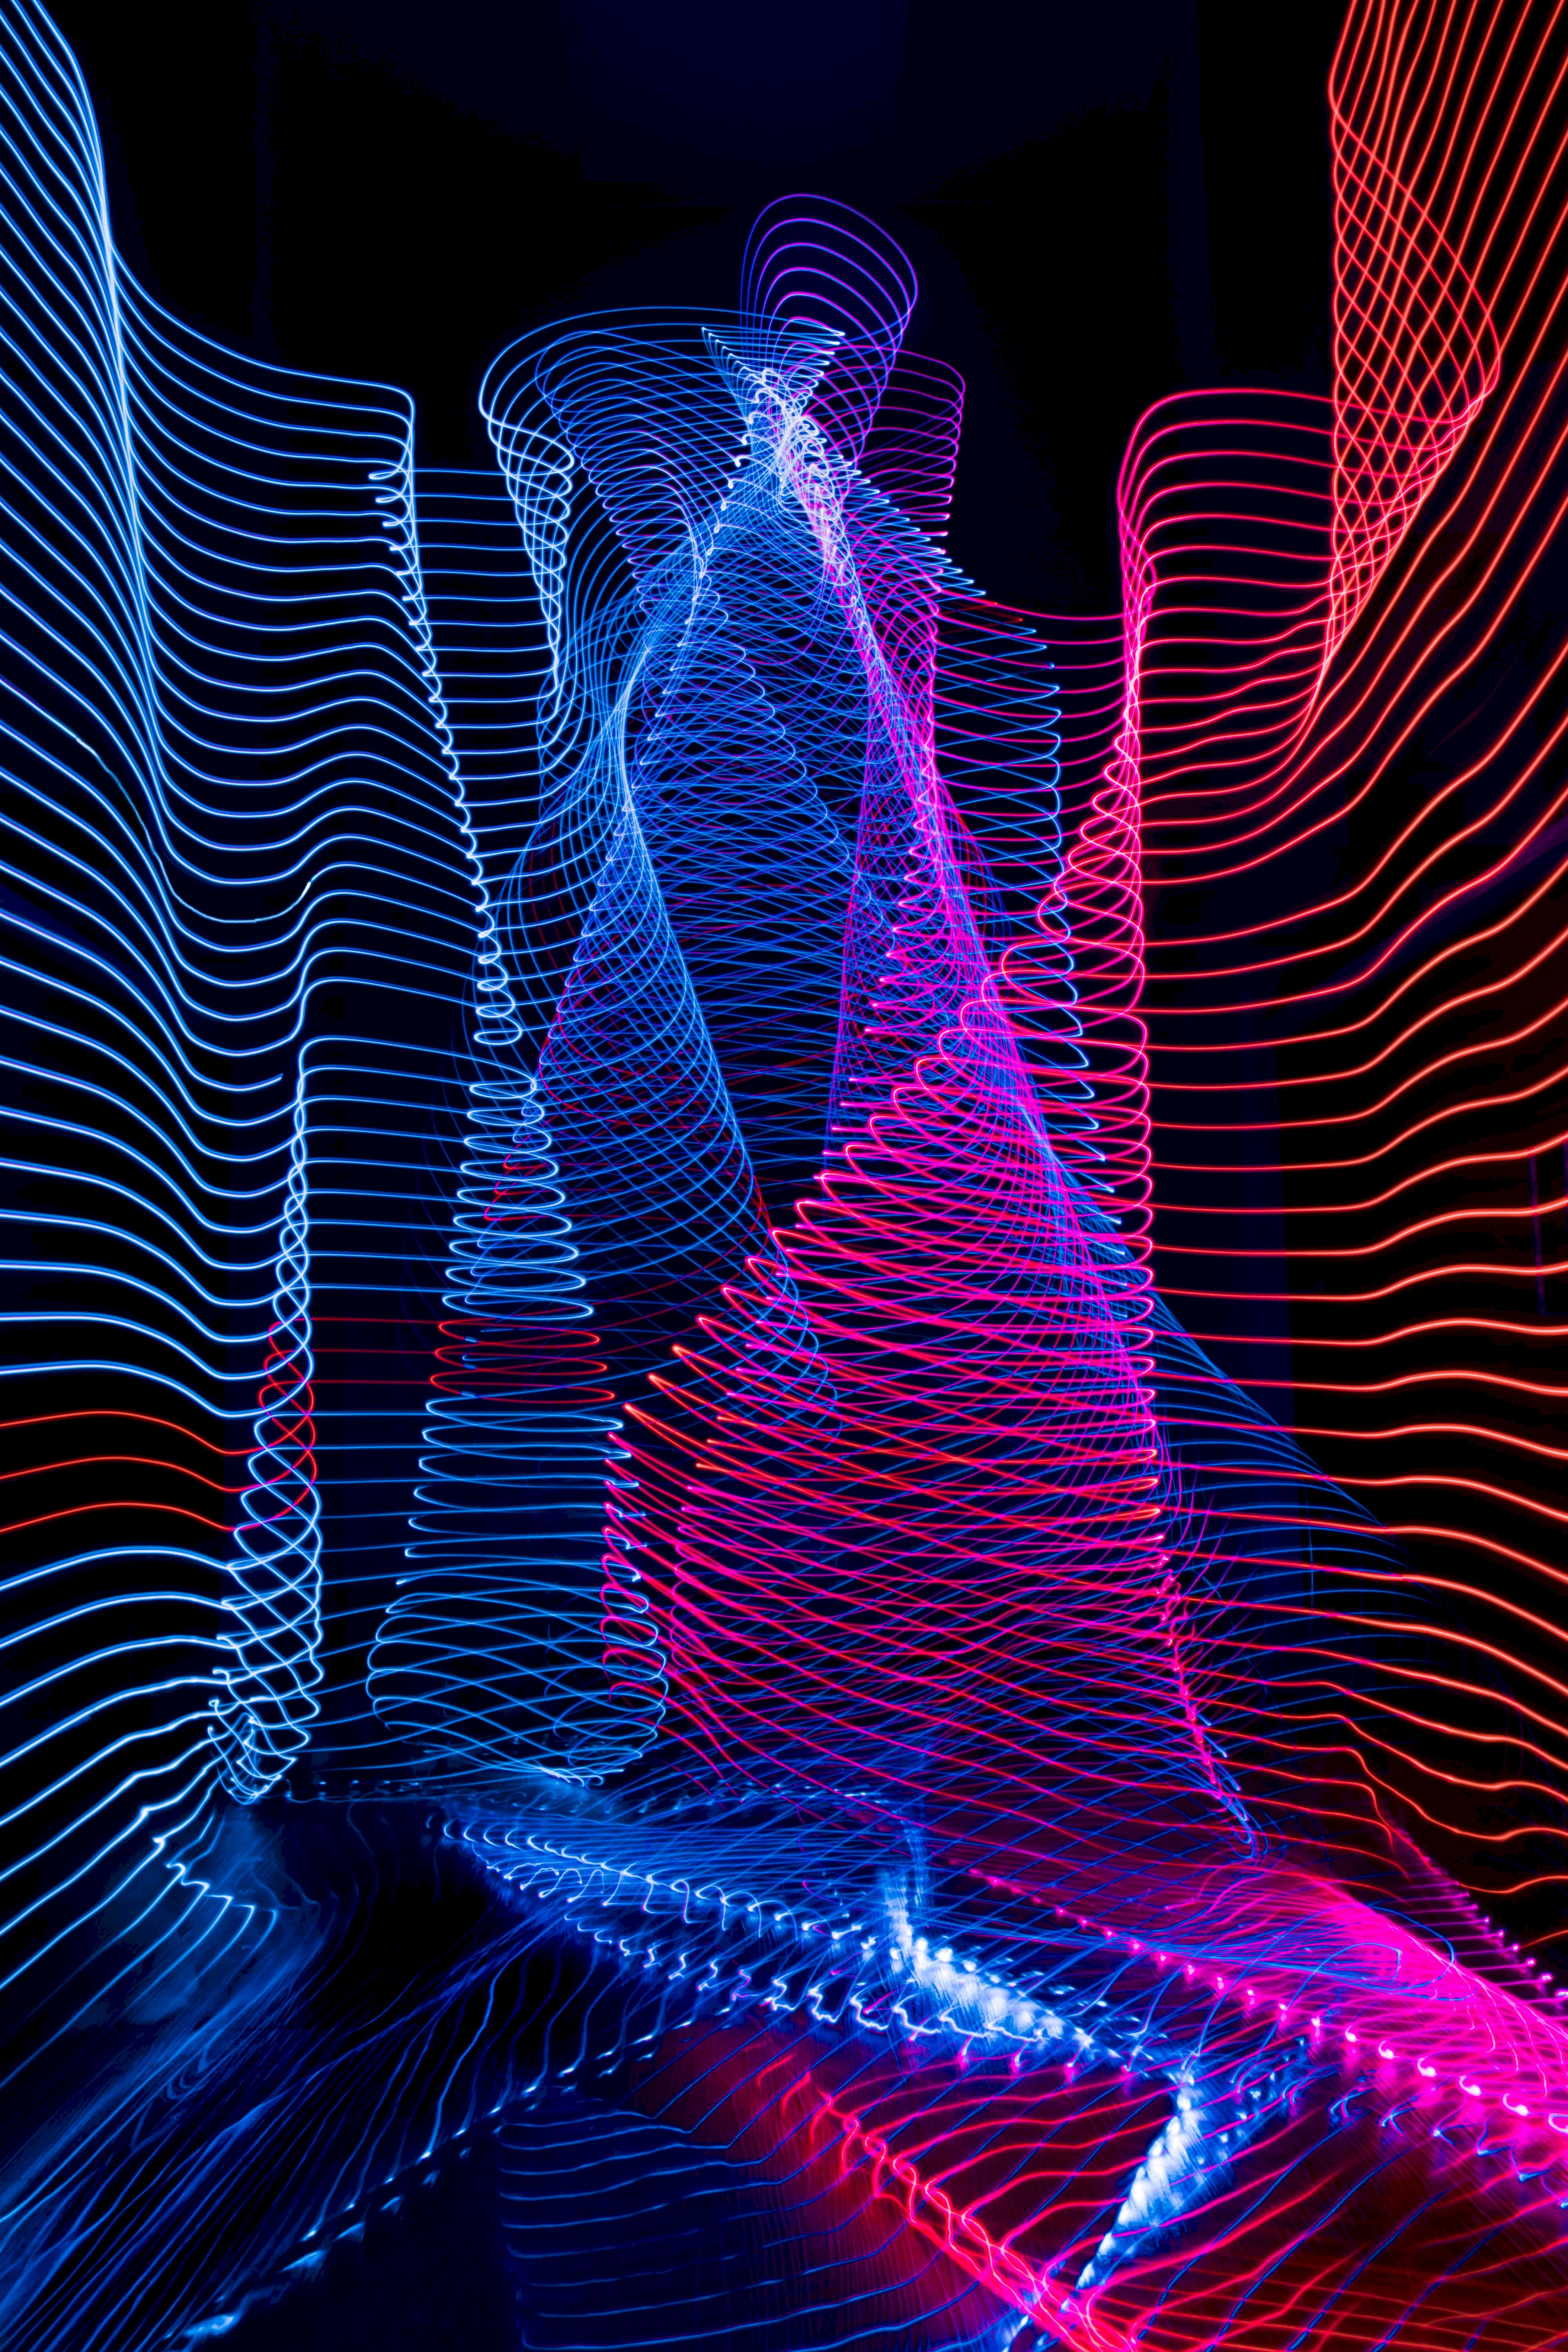 weave, abstract, lines, blue, red, grid